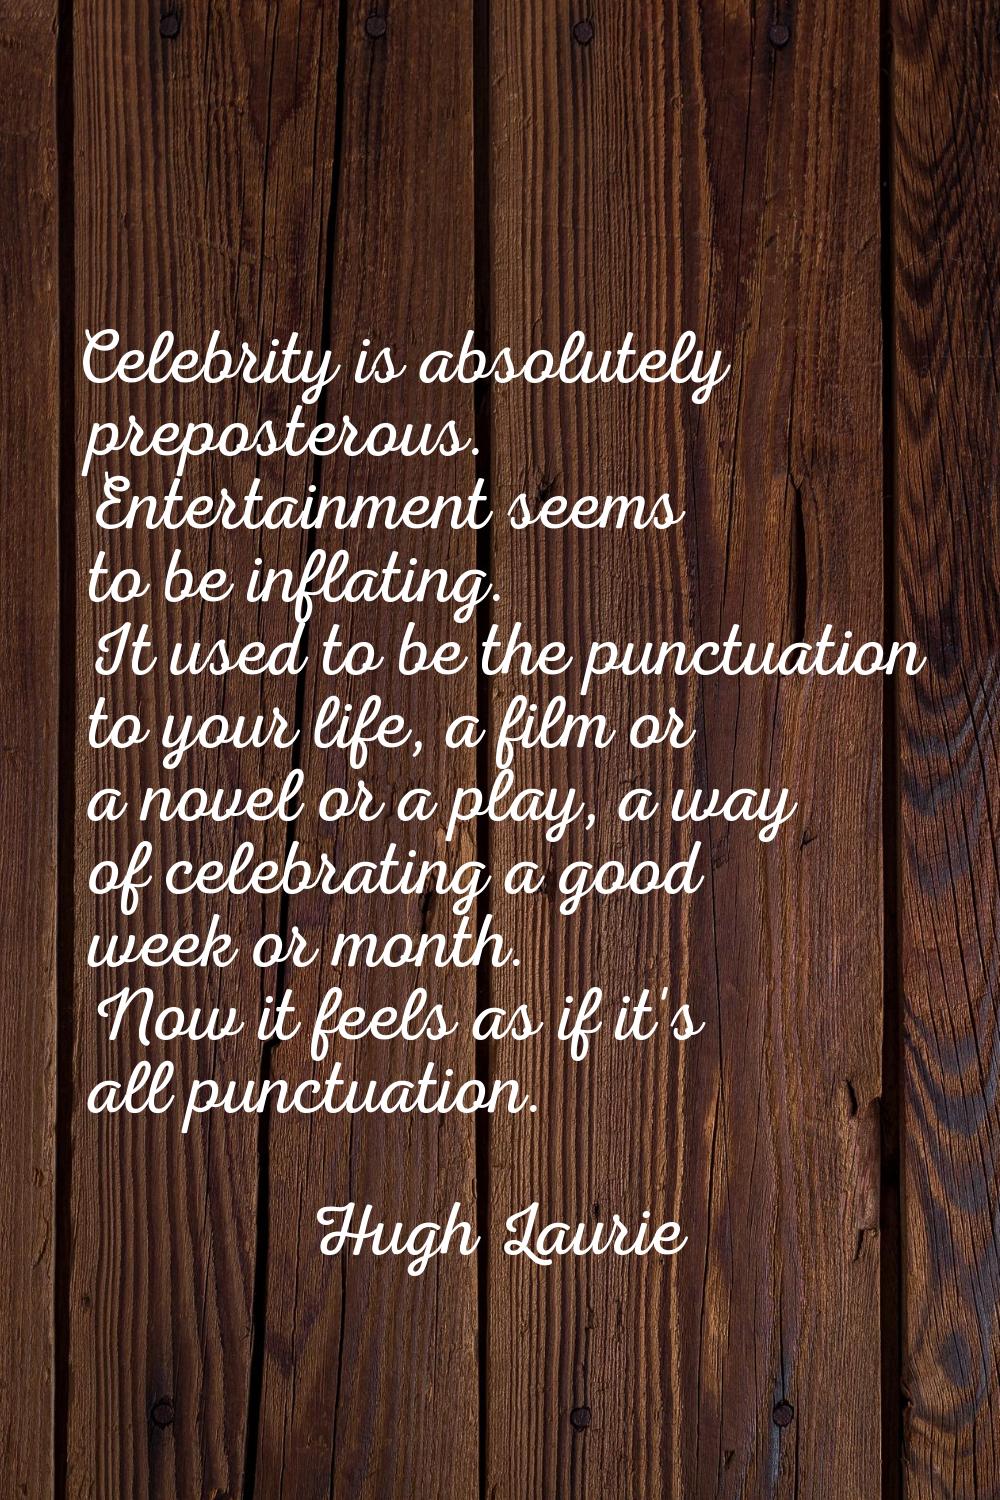 Celebrity is absolutely preposterous. Entertainment seems to be inflating. It used to be the punctu